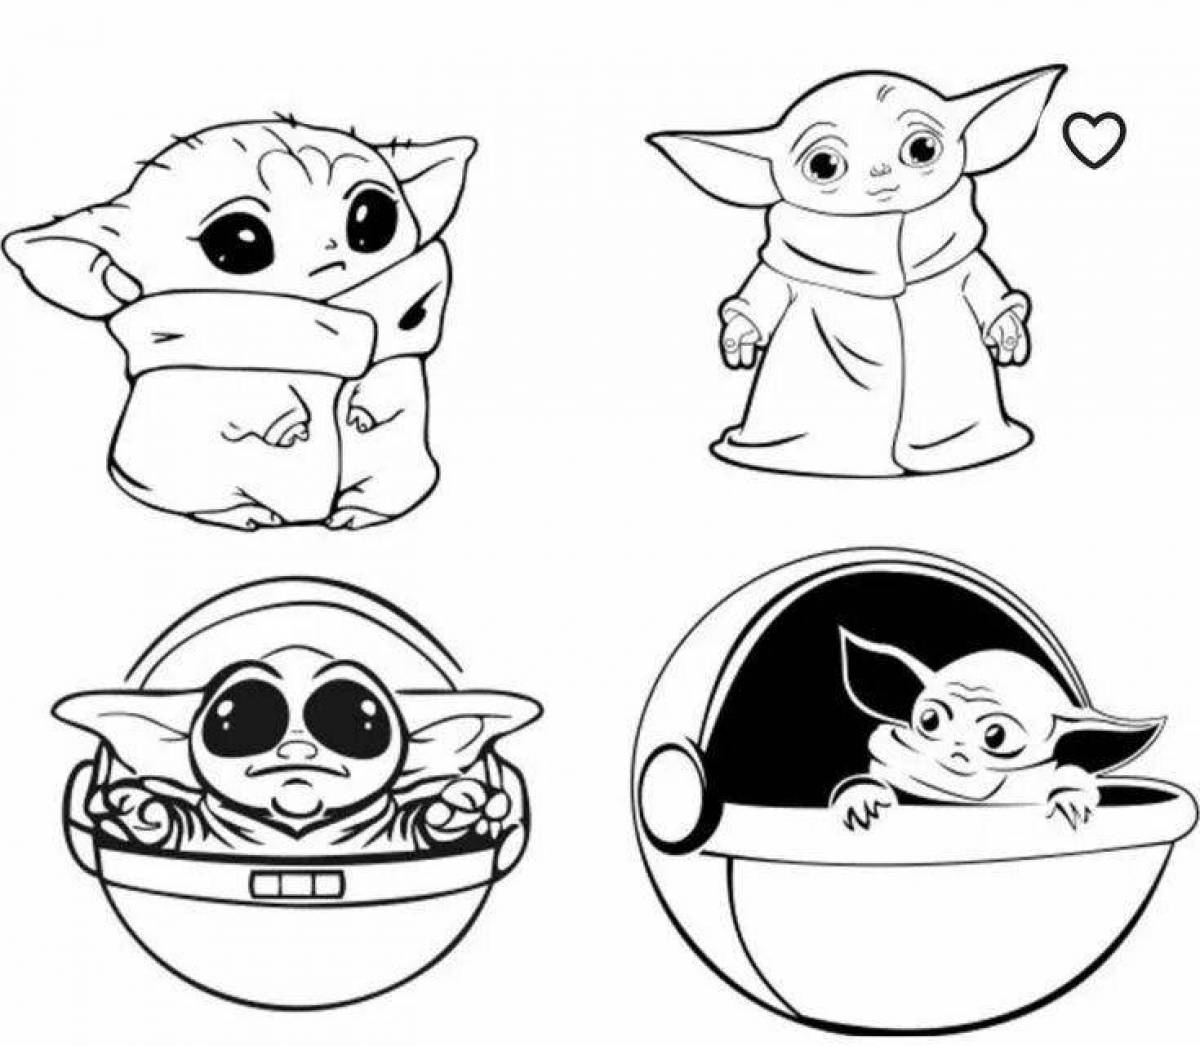 Adorable star wars food coloring page